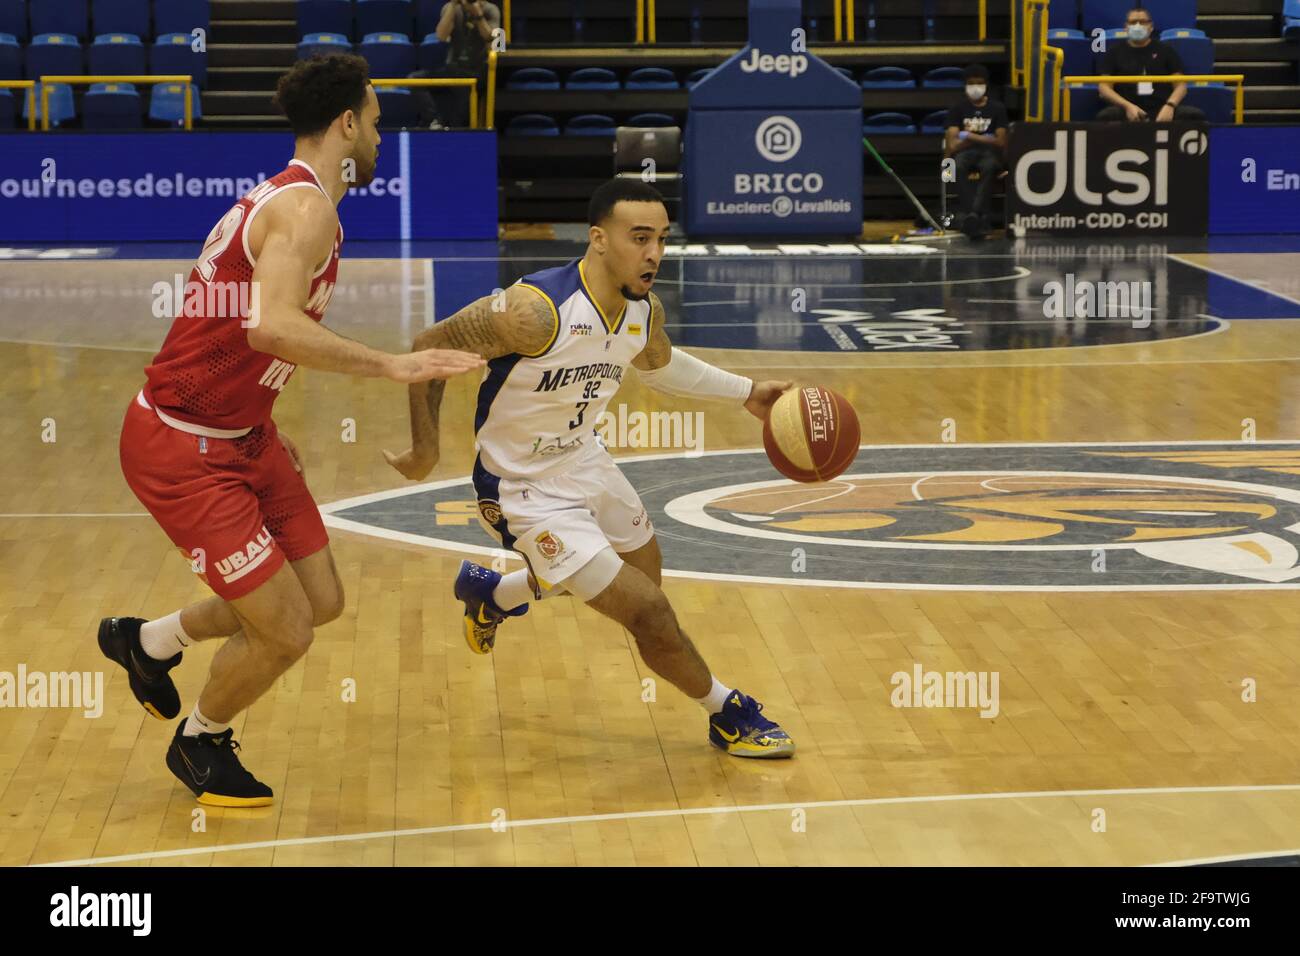 Levallois, Hauts de Seine, France. 20th Apr, 2021. BRANDON BROWN point  guard of Levallois in action during the French Basket championship Jeep  Elite between Levallois and Monaco at Marcel Cerdant stadium -